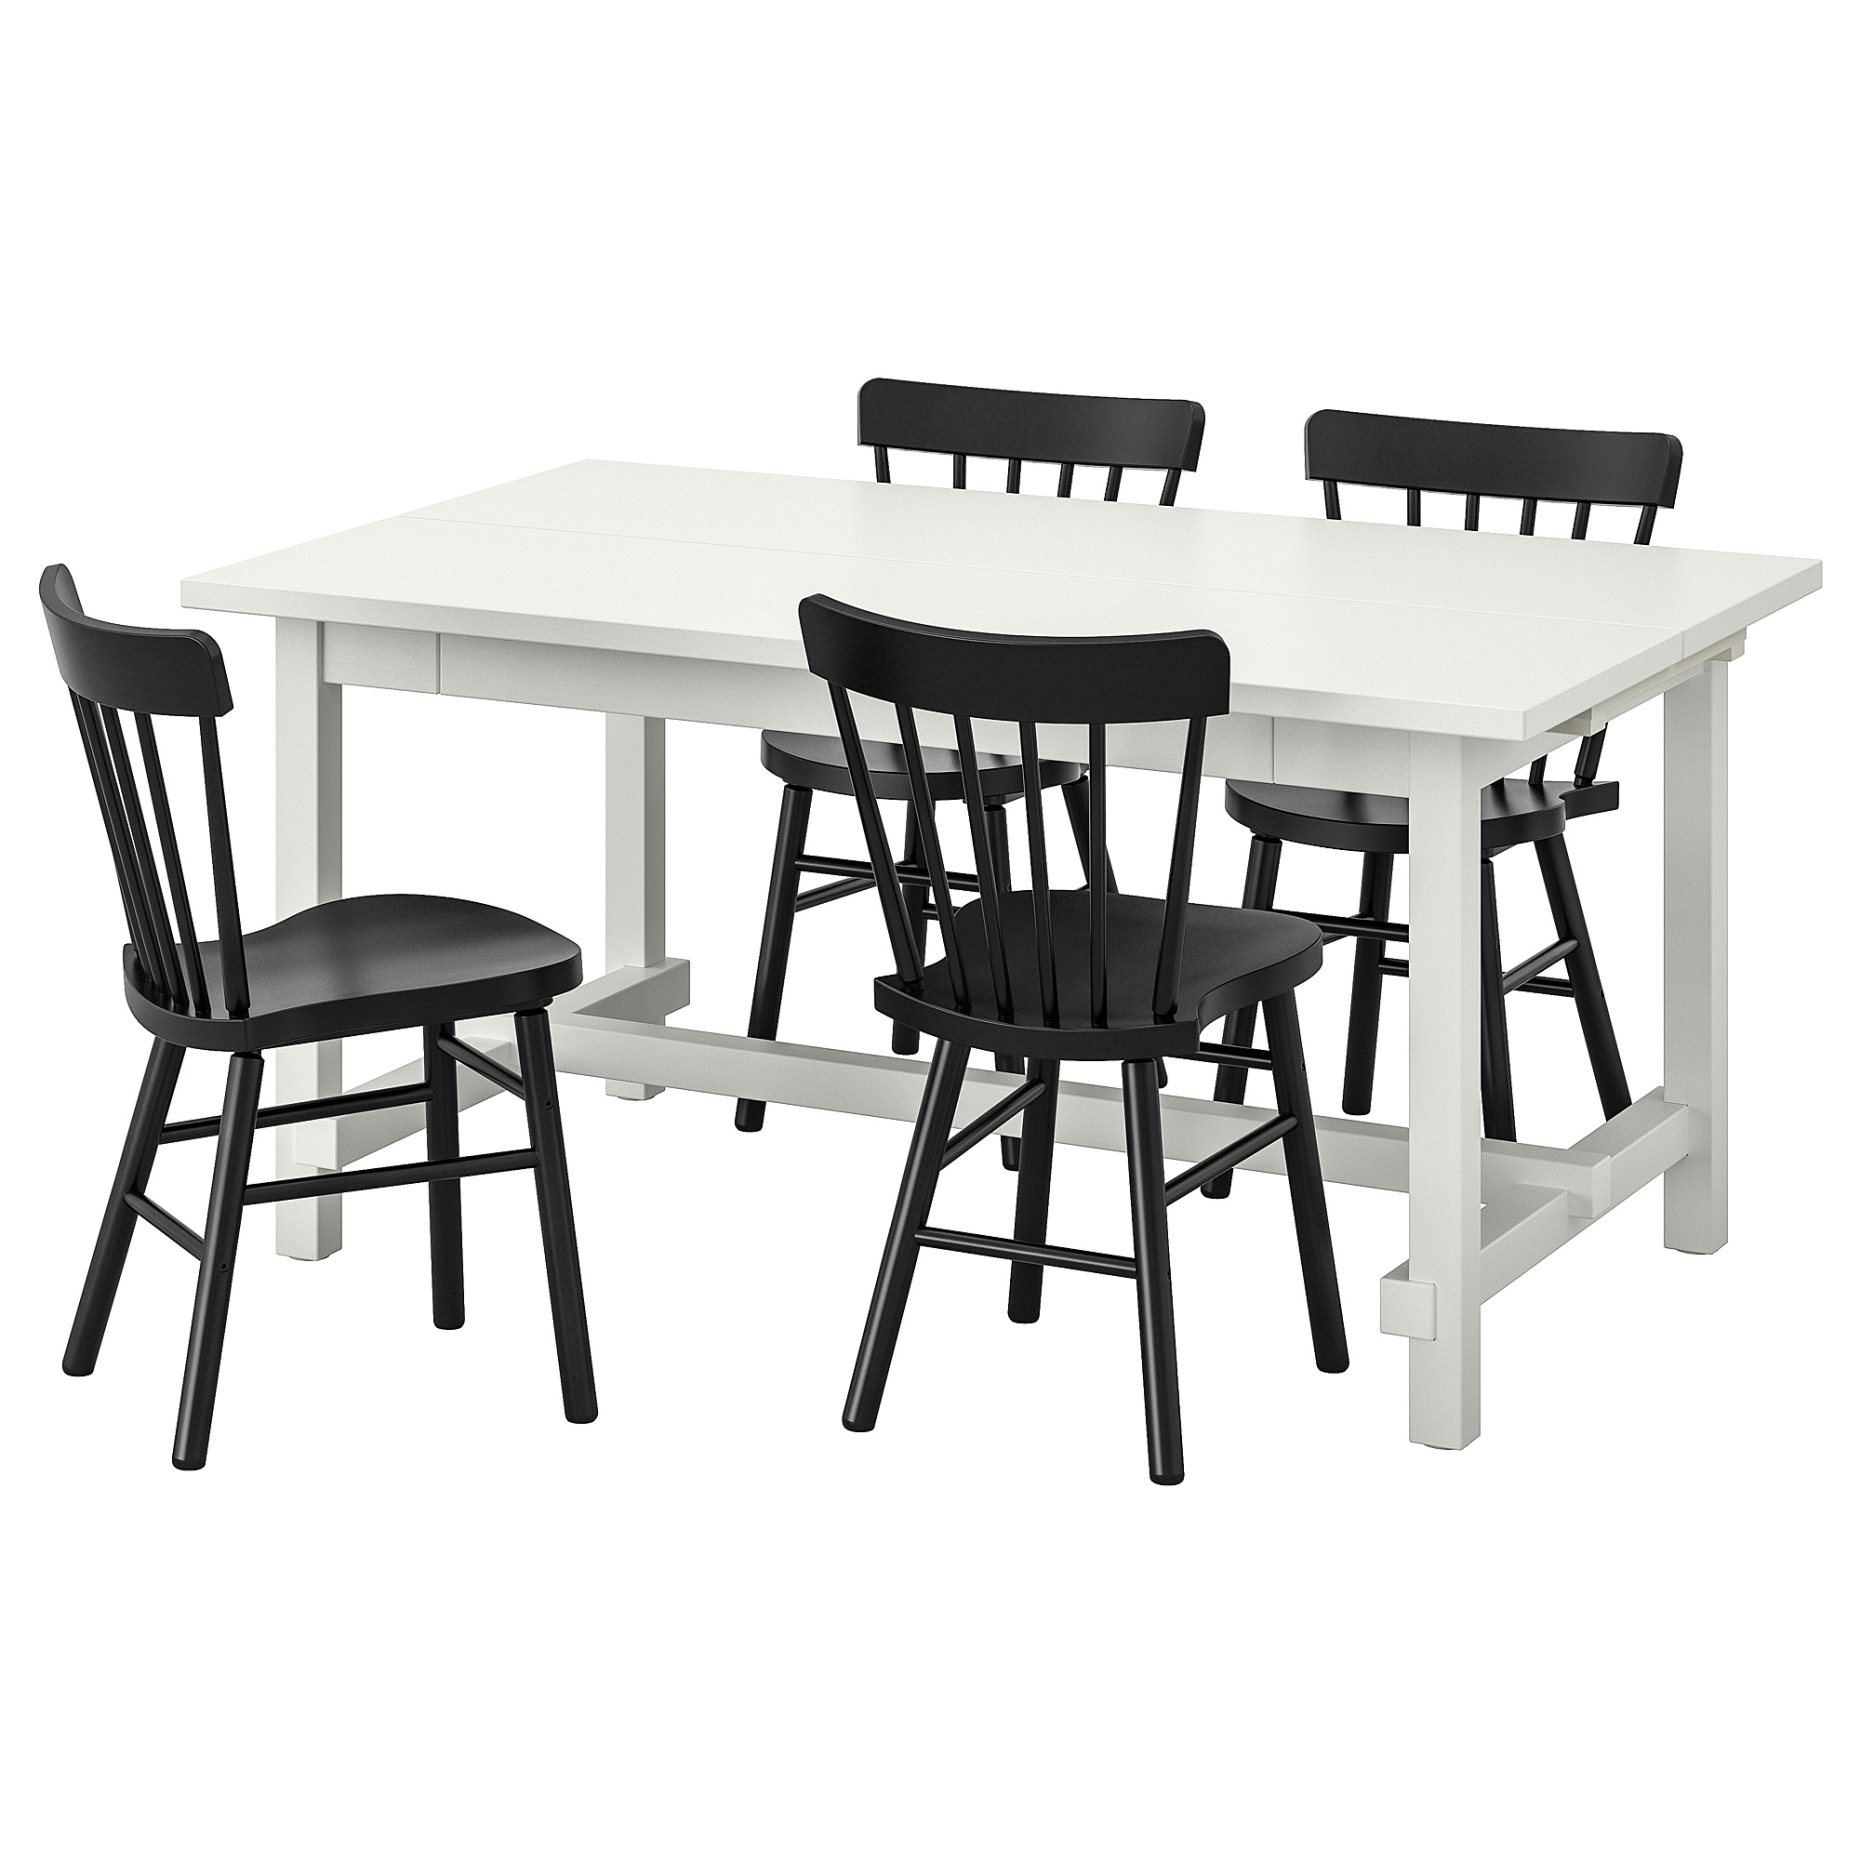 NORDVIKEN/NORRARYD, table and 4 chairs, 693.051.74